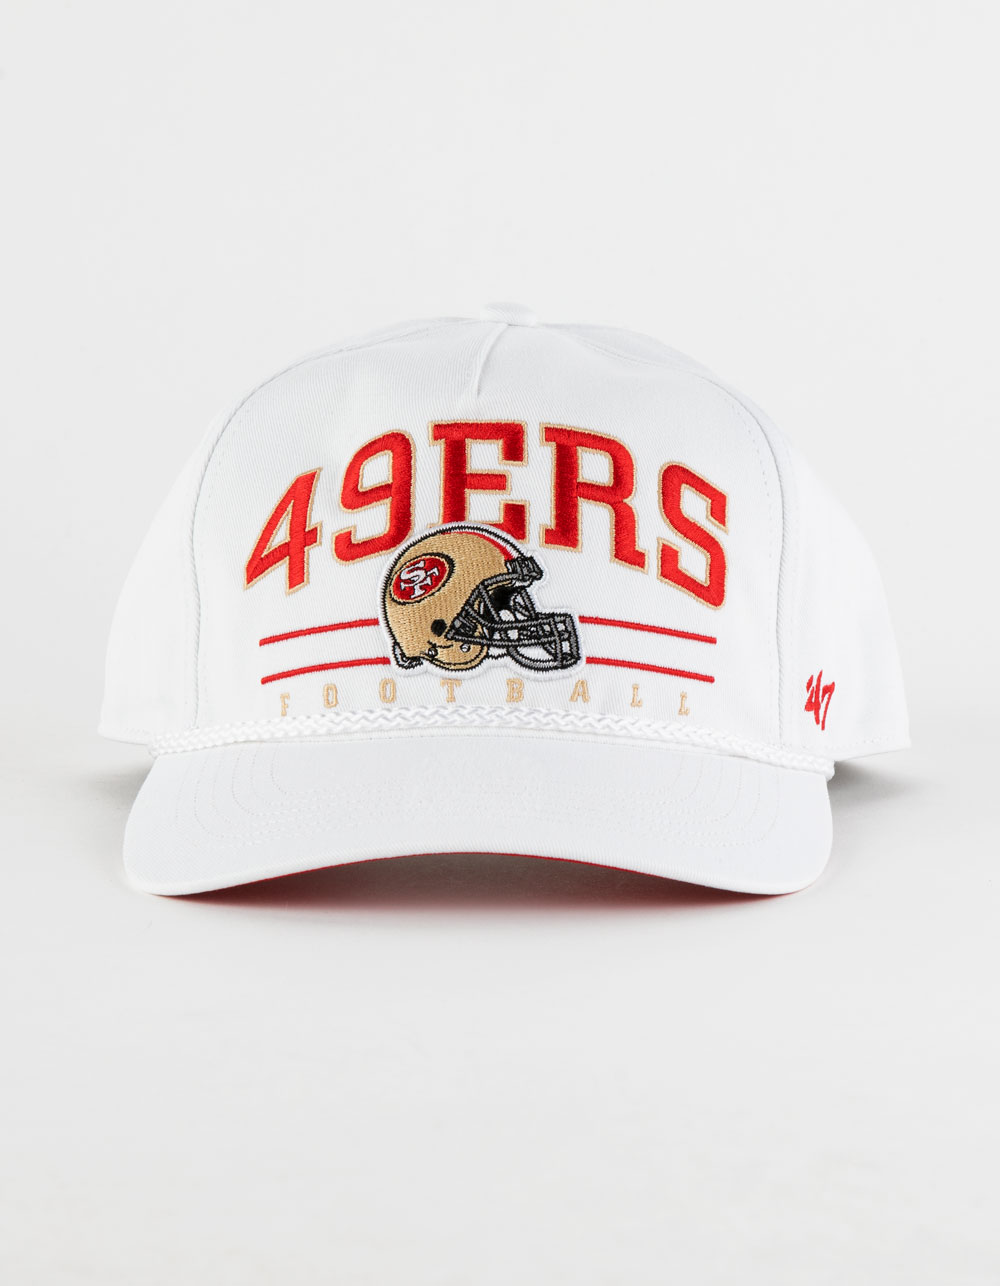 cotton candy 49ers hat